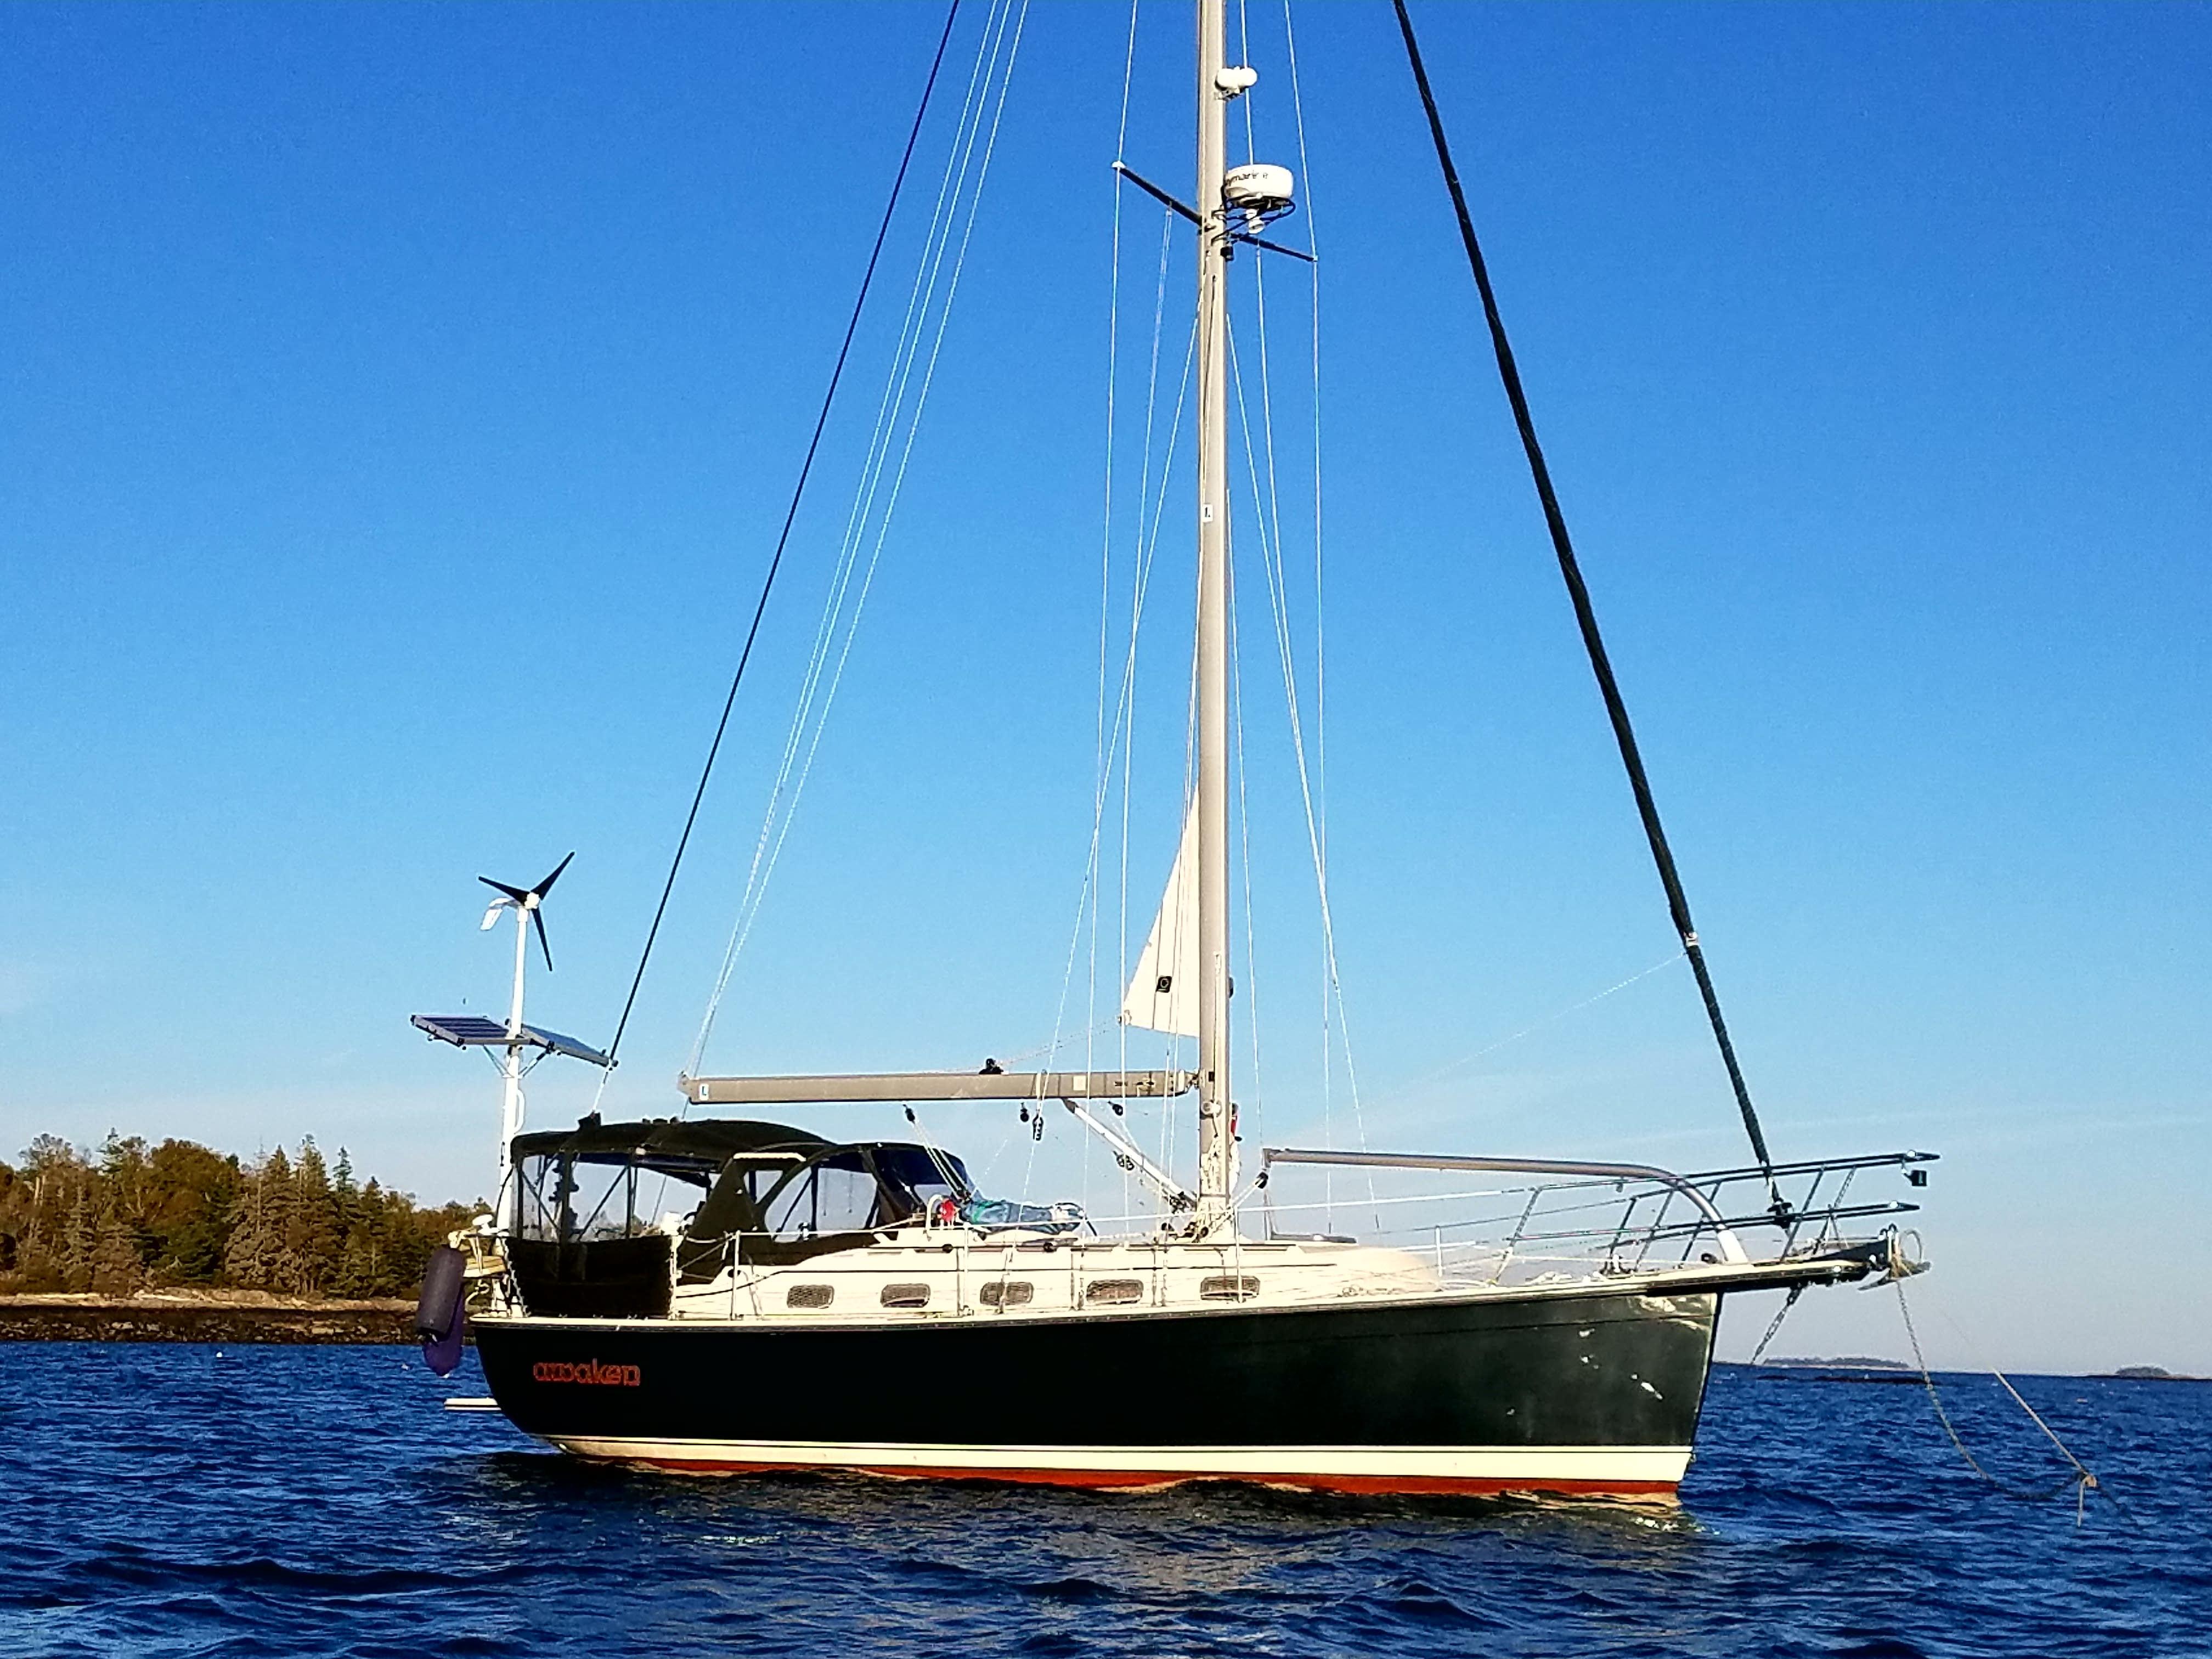 island packet yachts out of business